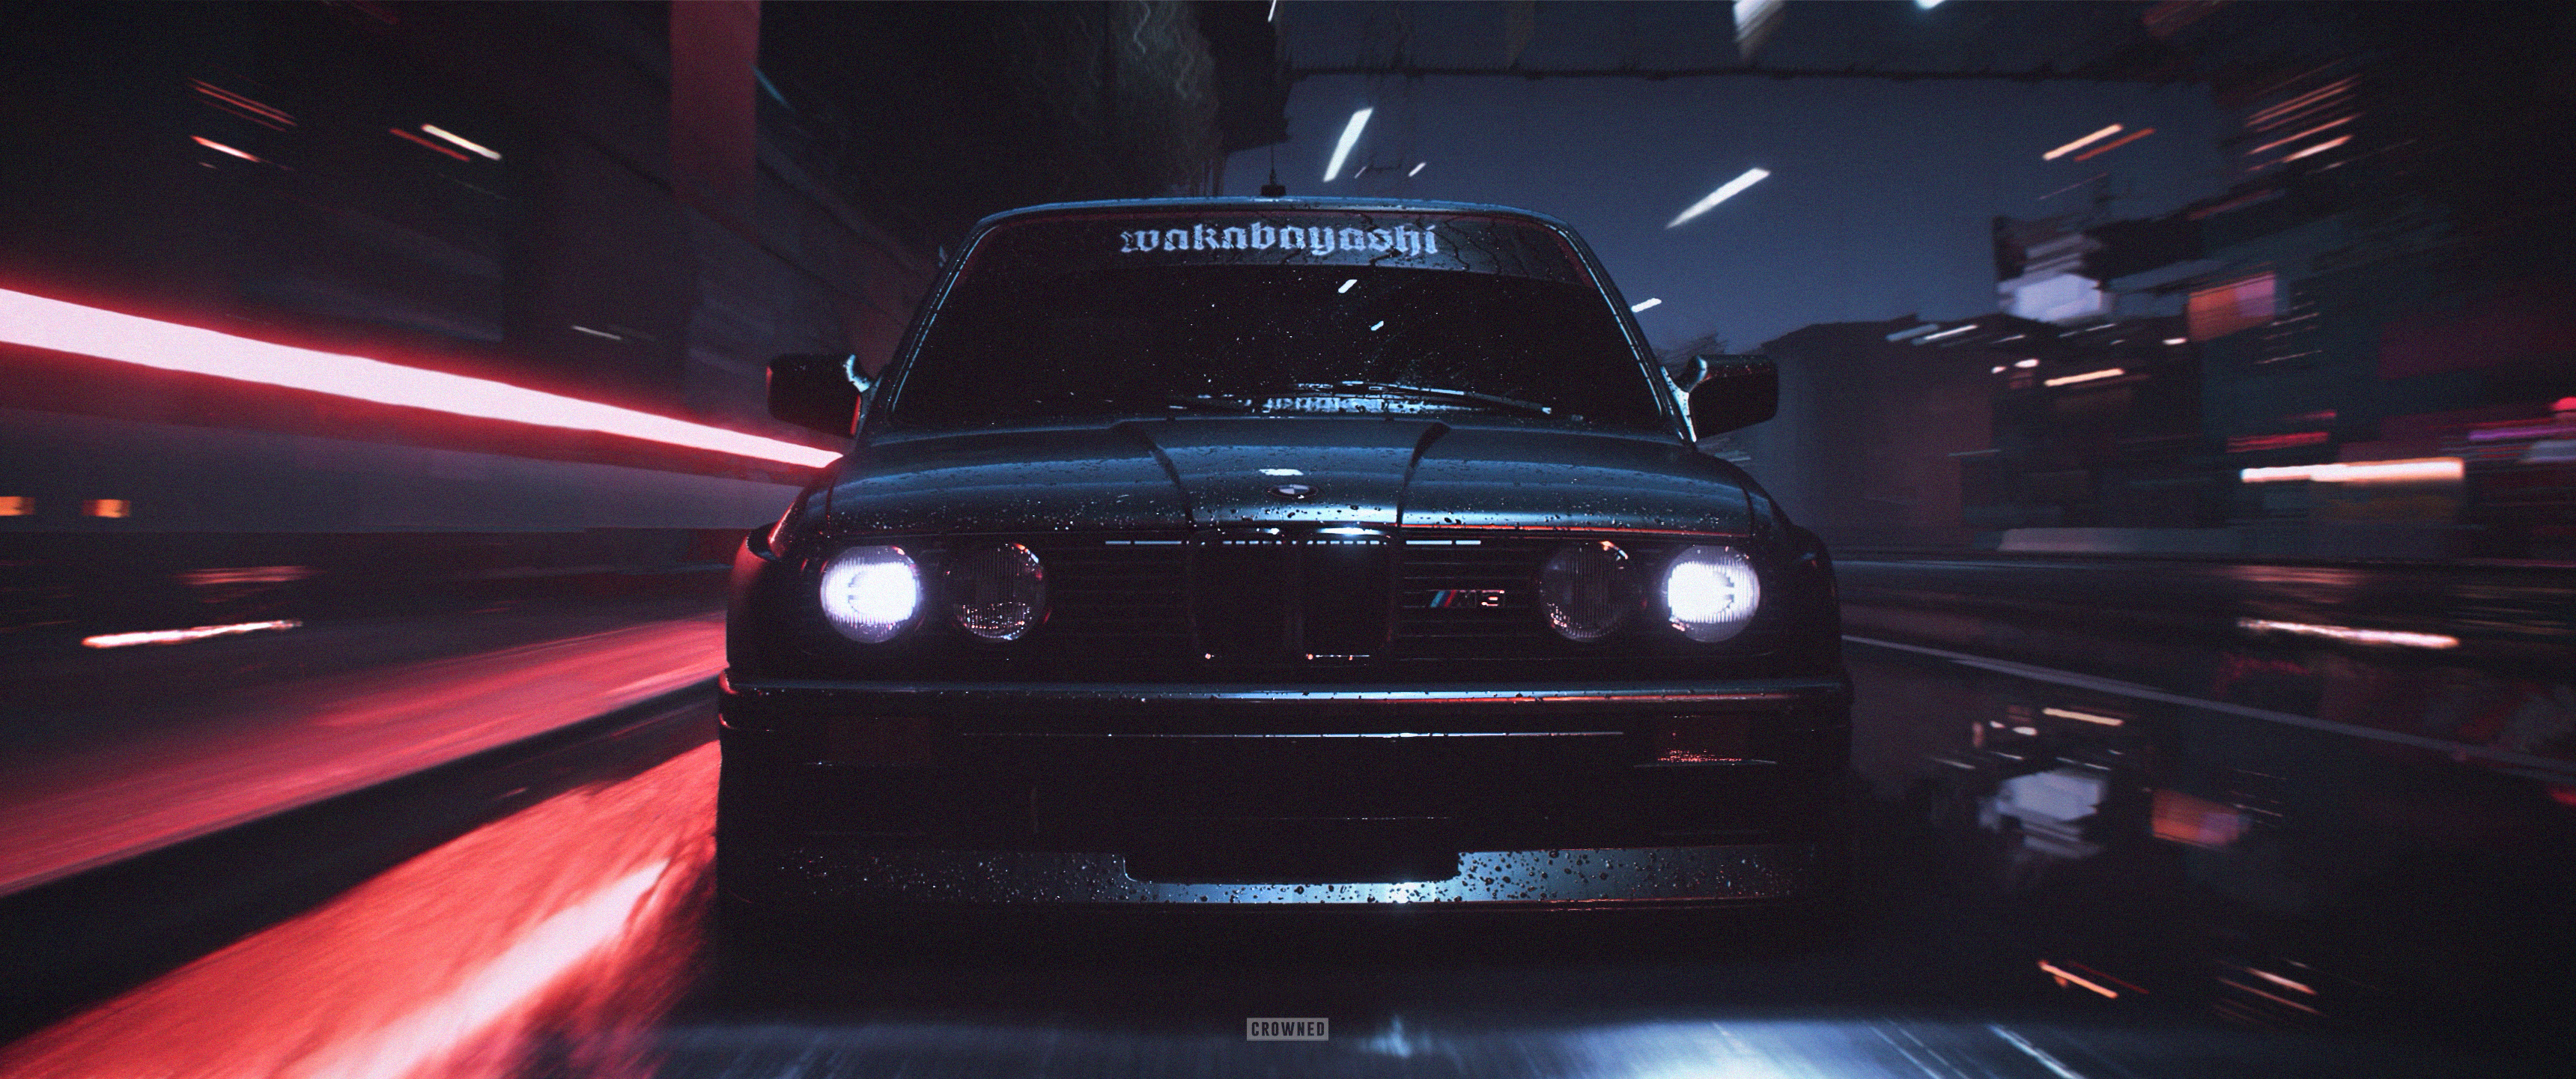 CROWNED Need For Speed BMW M3 Car BMW M3 E30 BMW E30 Frontal View Video Games BMW 3 Series 3440x1441